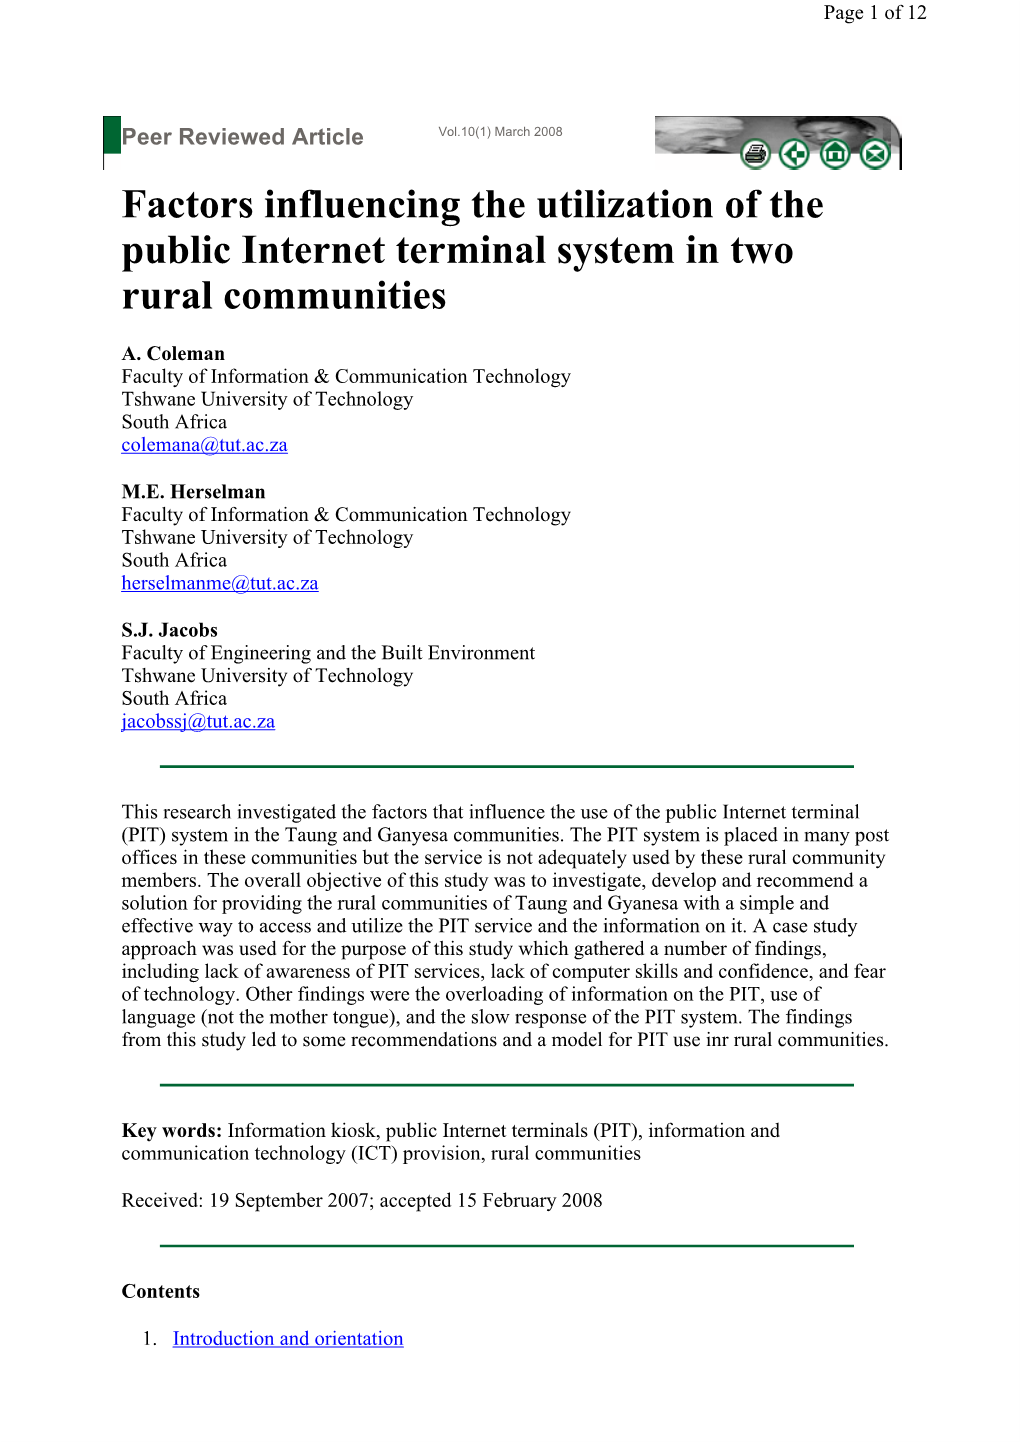 Factors Influencing the Utilization of the Public Internet Terminal System in Two Rural Communities